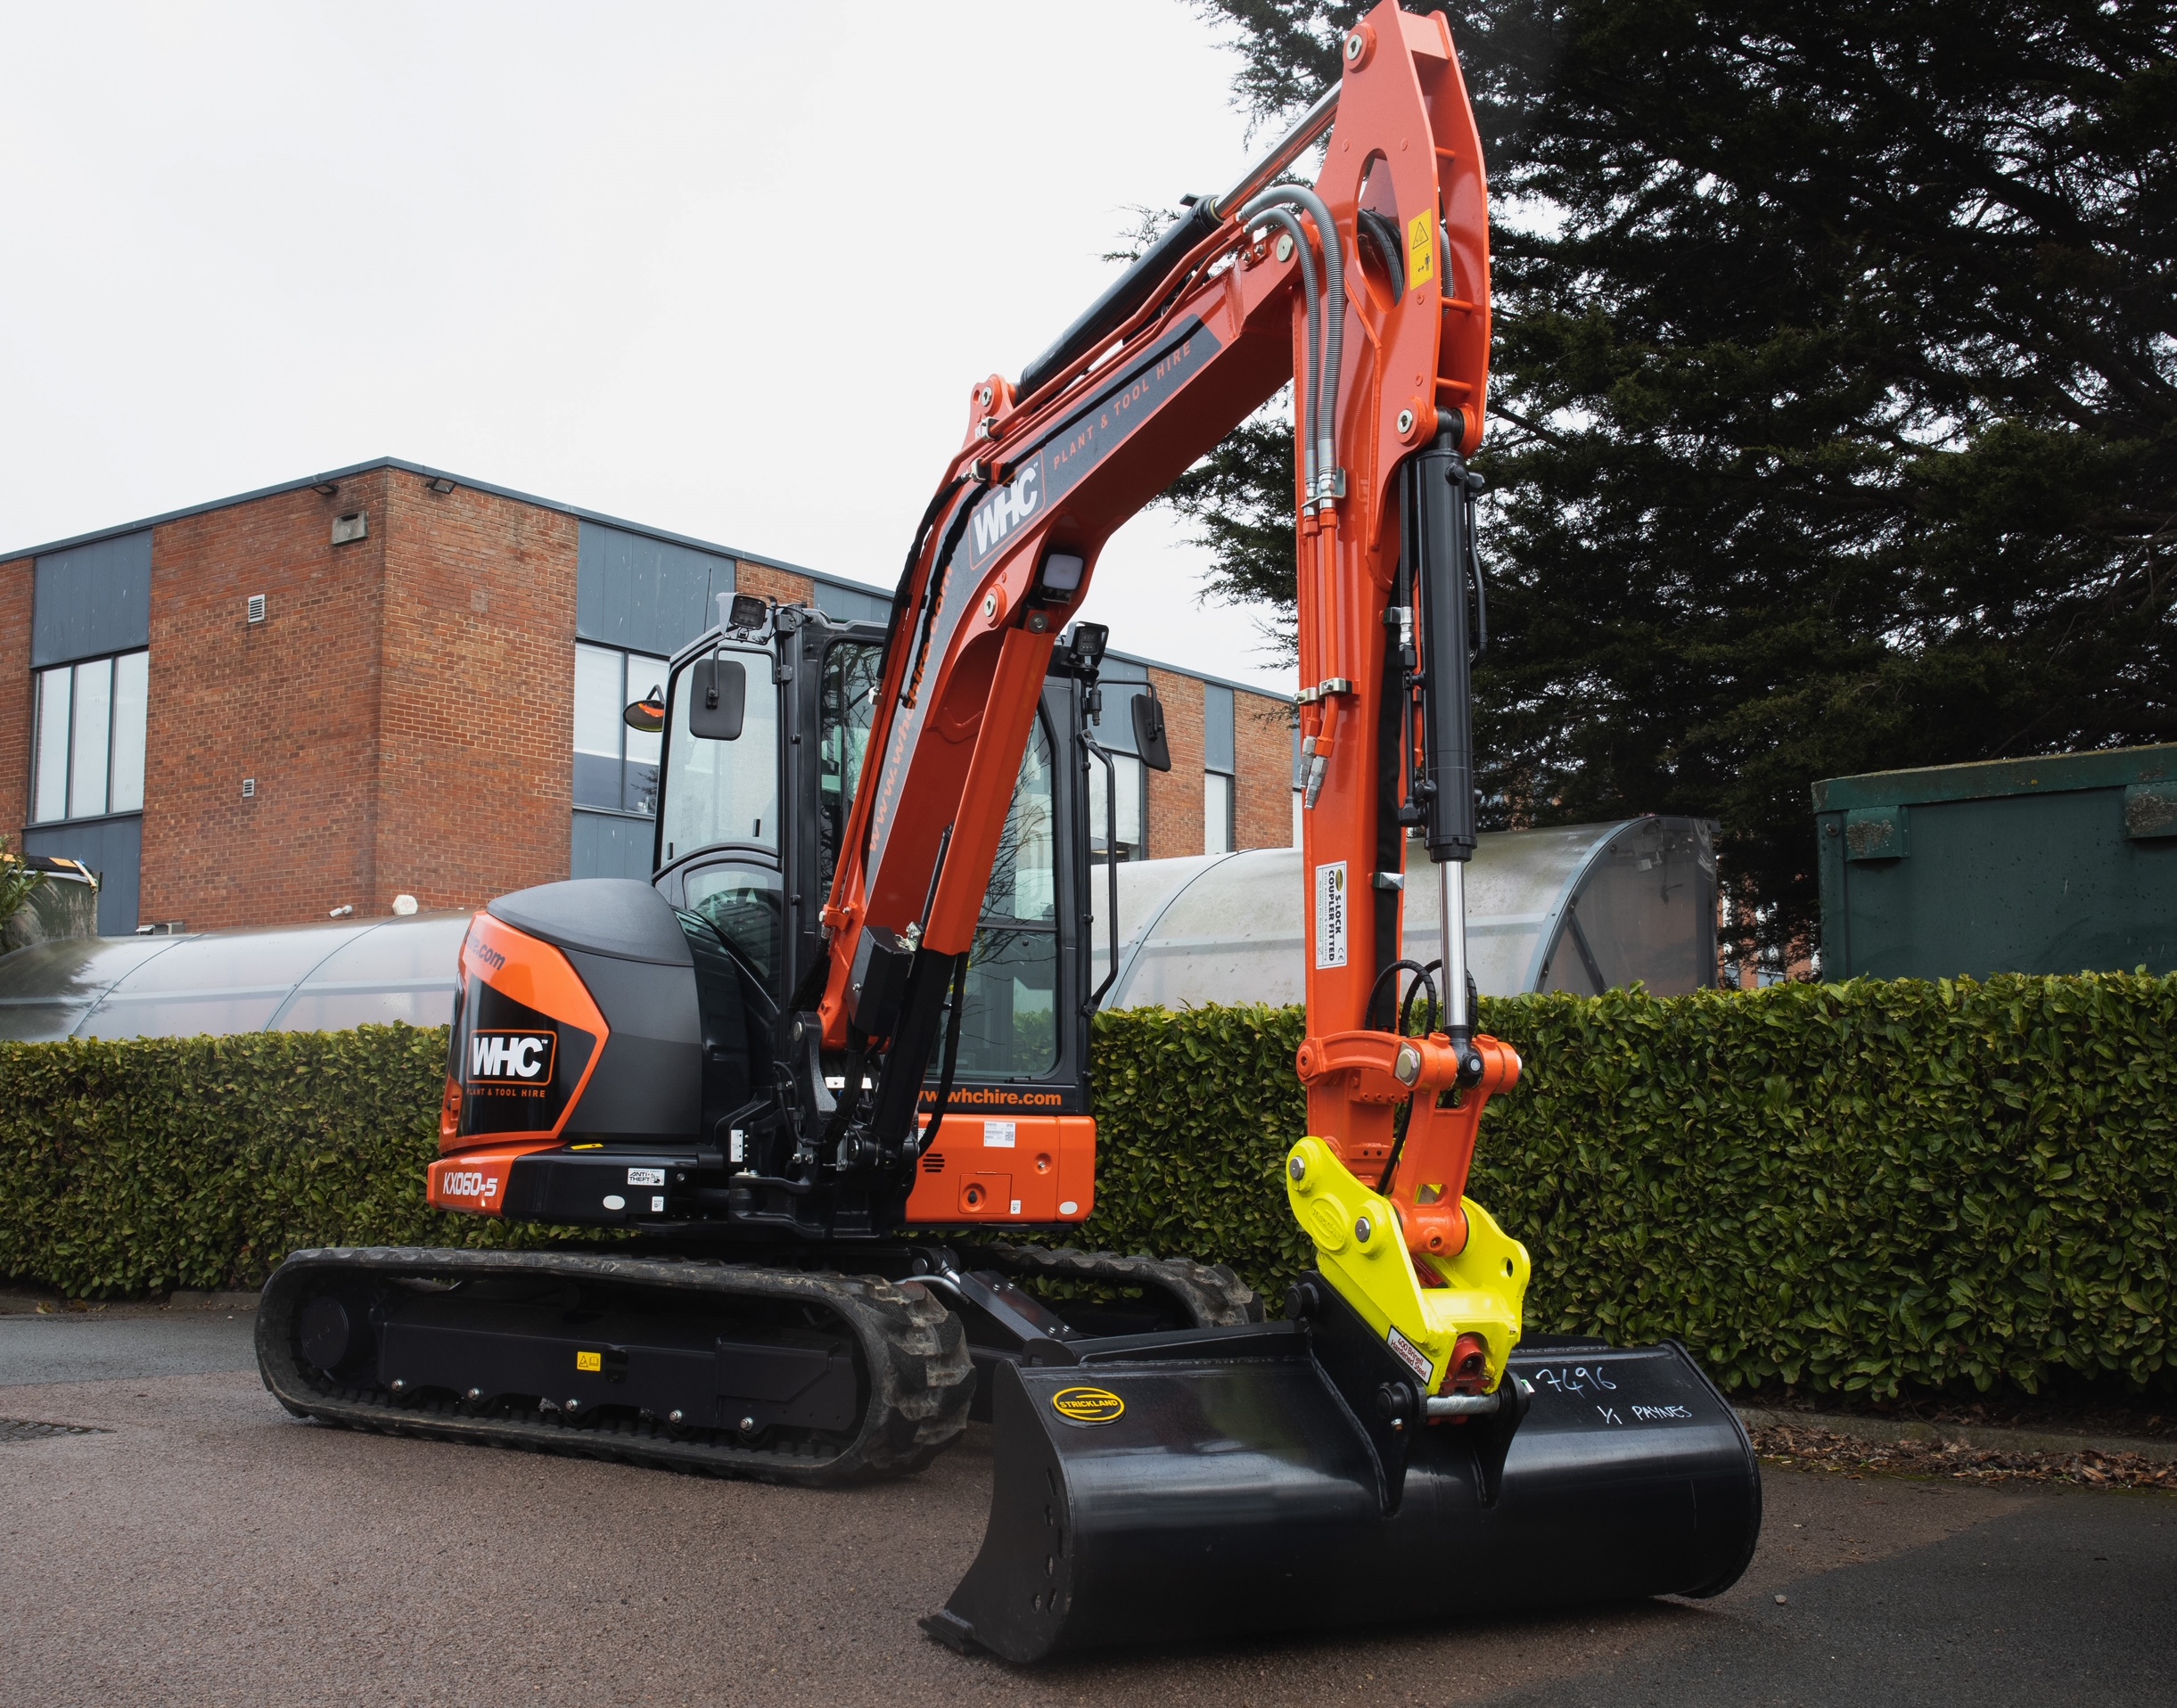 WHC Hire services continues to put its trust in Kubota